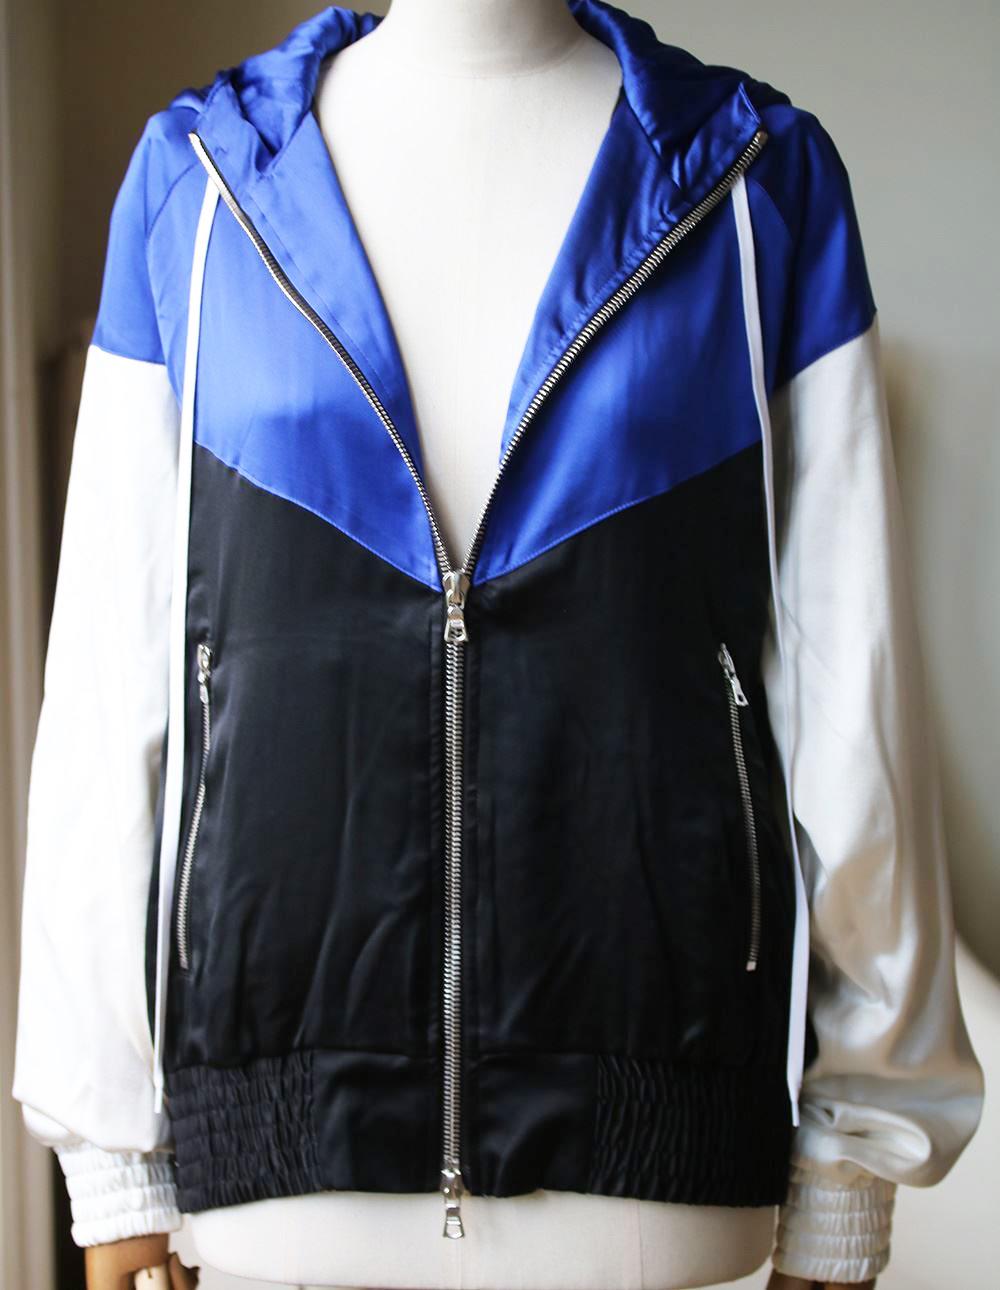 High-shine in glossy silk, this blue, white and black bomber is a youthful layer from Amiri. A hood keeps it practical while the relaxed fit works with denim or contrasted against sharp tailoring for a contemporary clash. 100% Silk.

Size: Small (UK